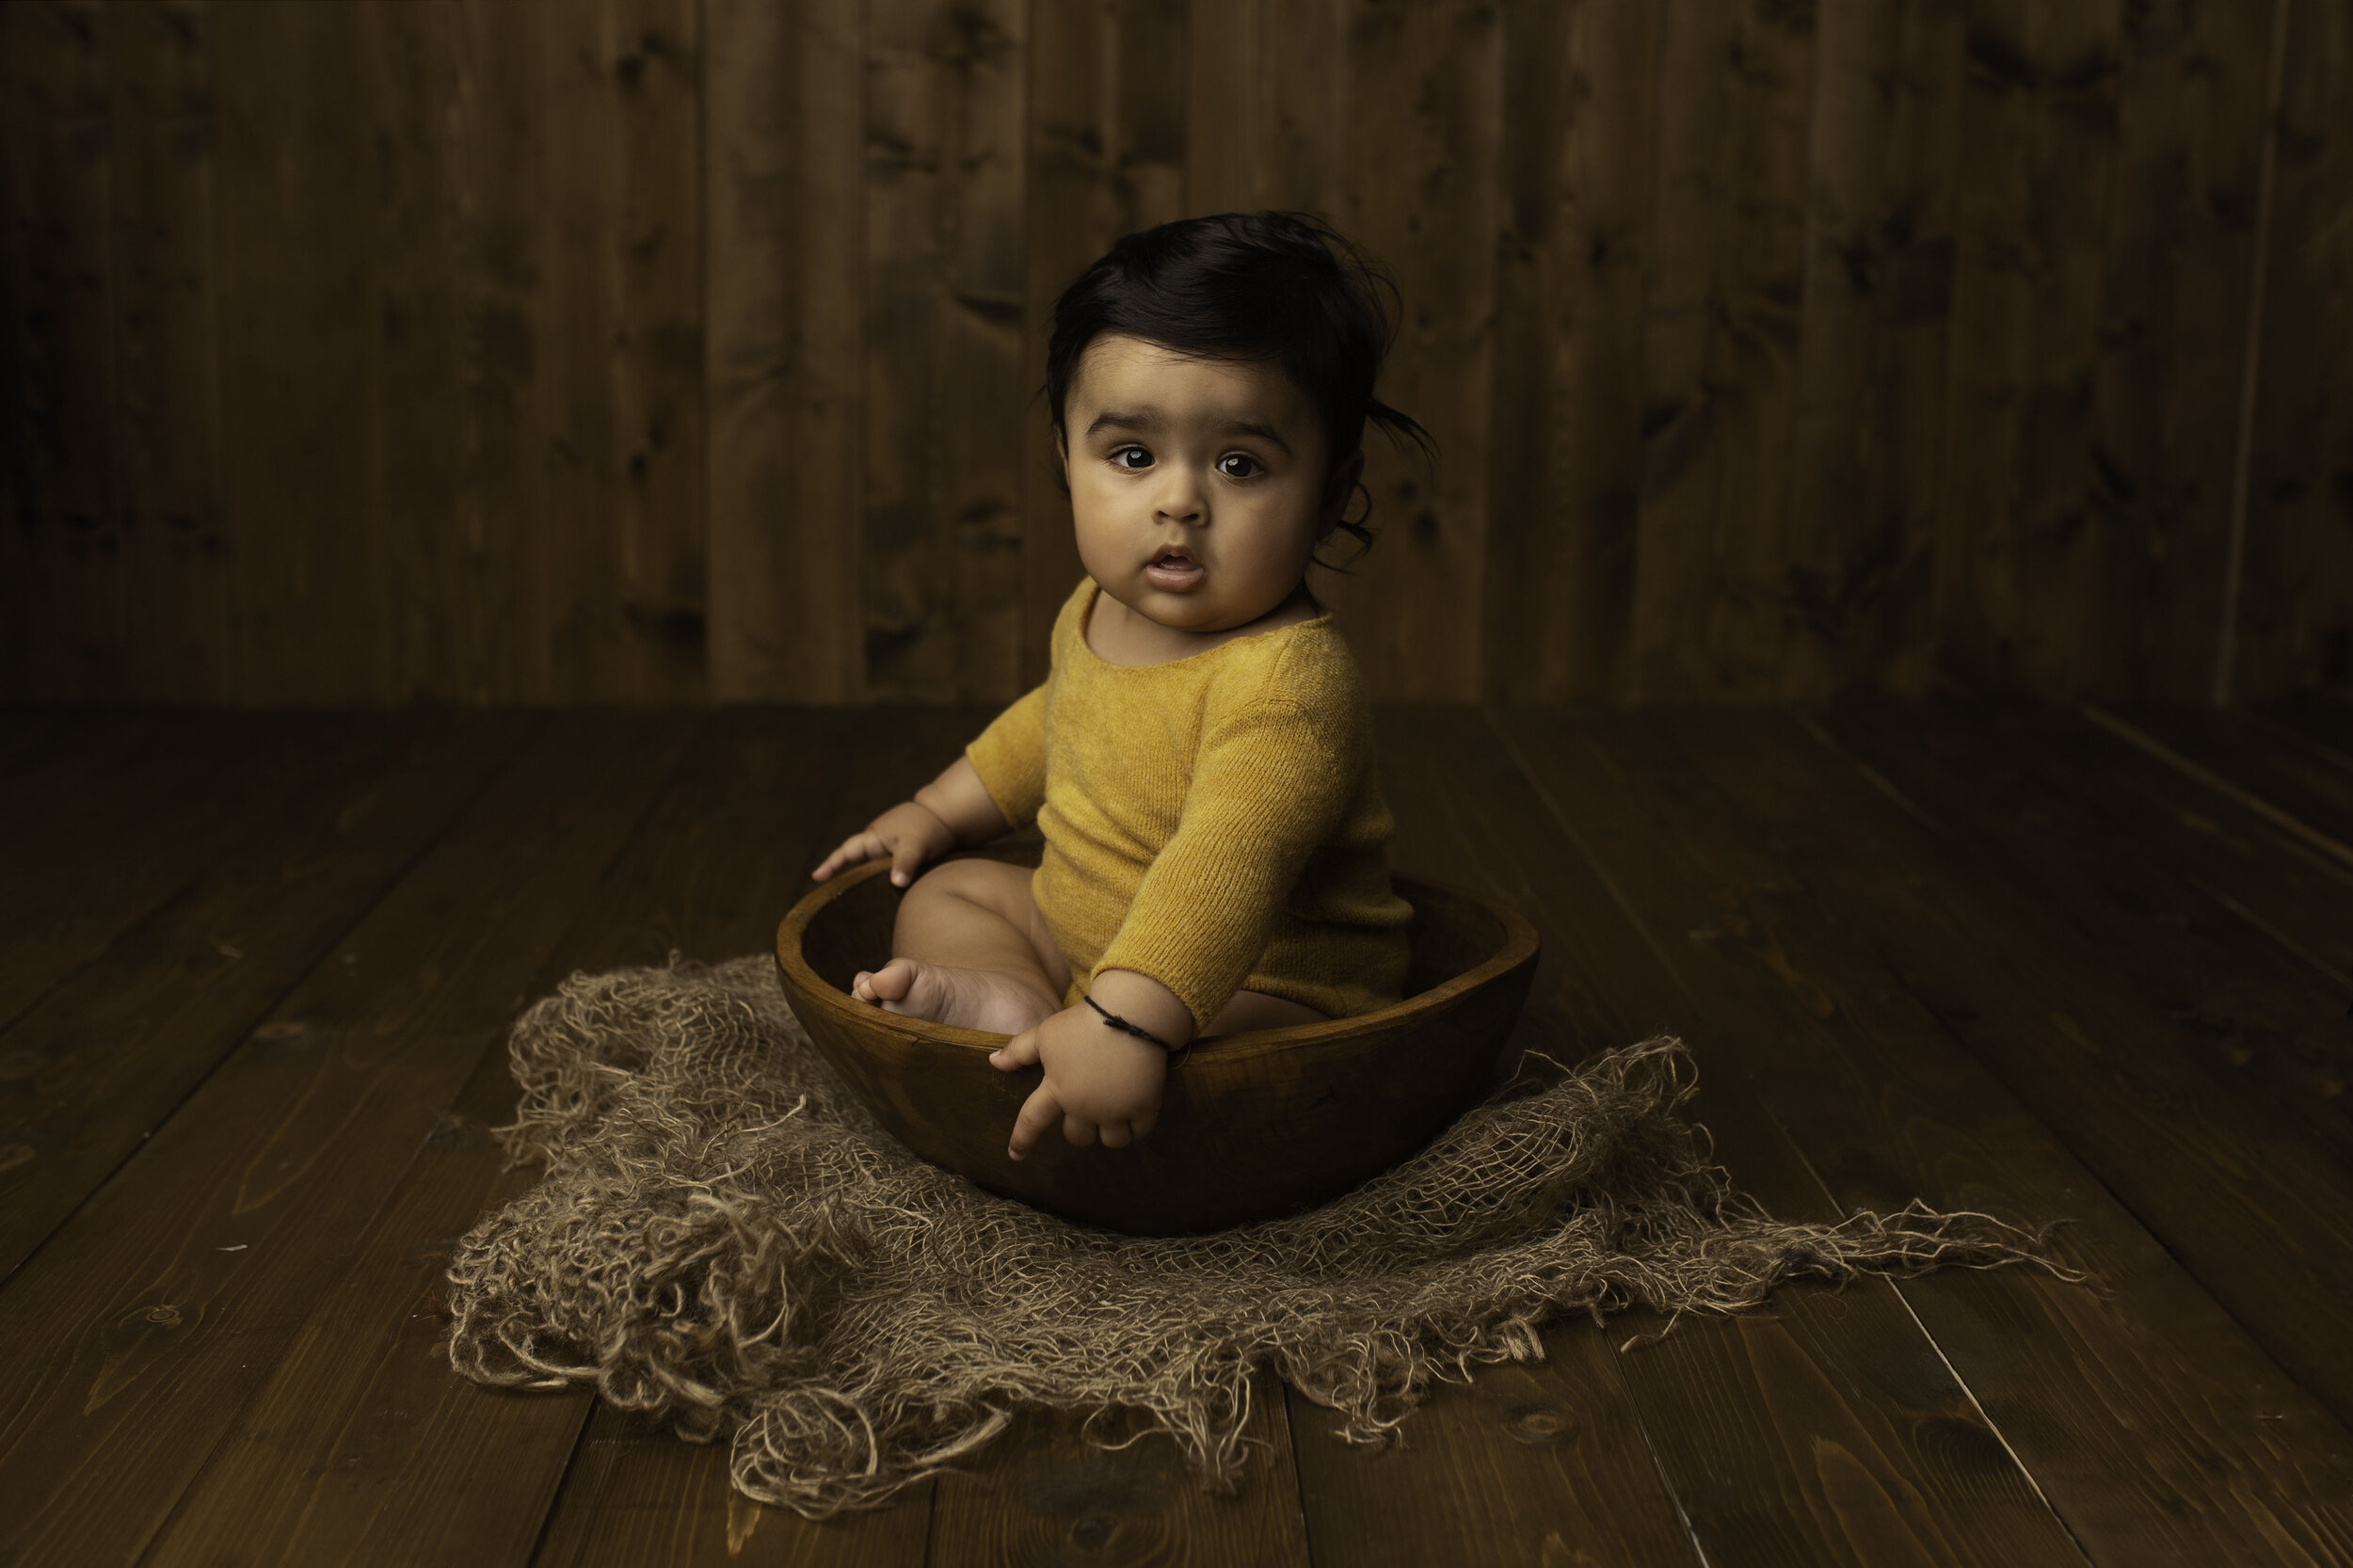 KYRAN-SITTER-SESSION-7-MONTH-OLD-CHILDRENS-PHOTOGRAPHY-LEA-COOOPER-PHOTOGRAPHY-8.jpg